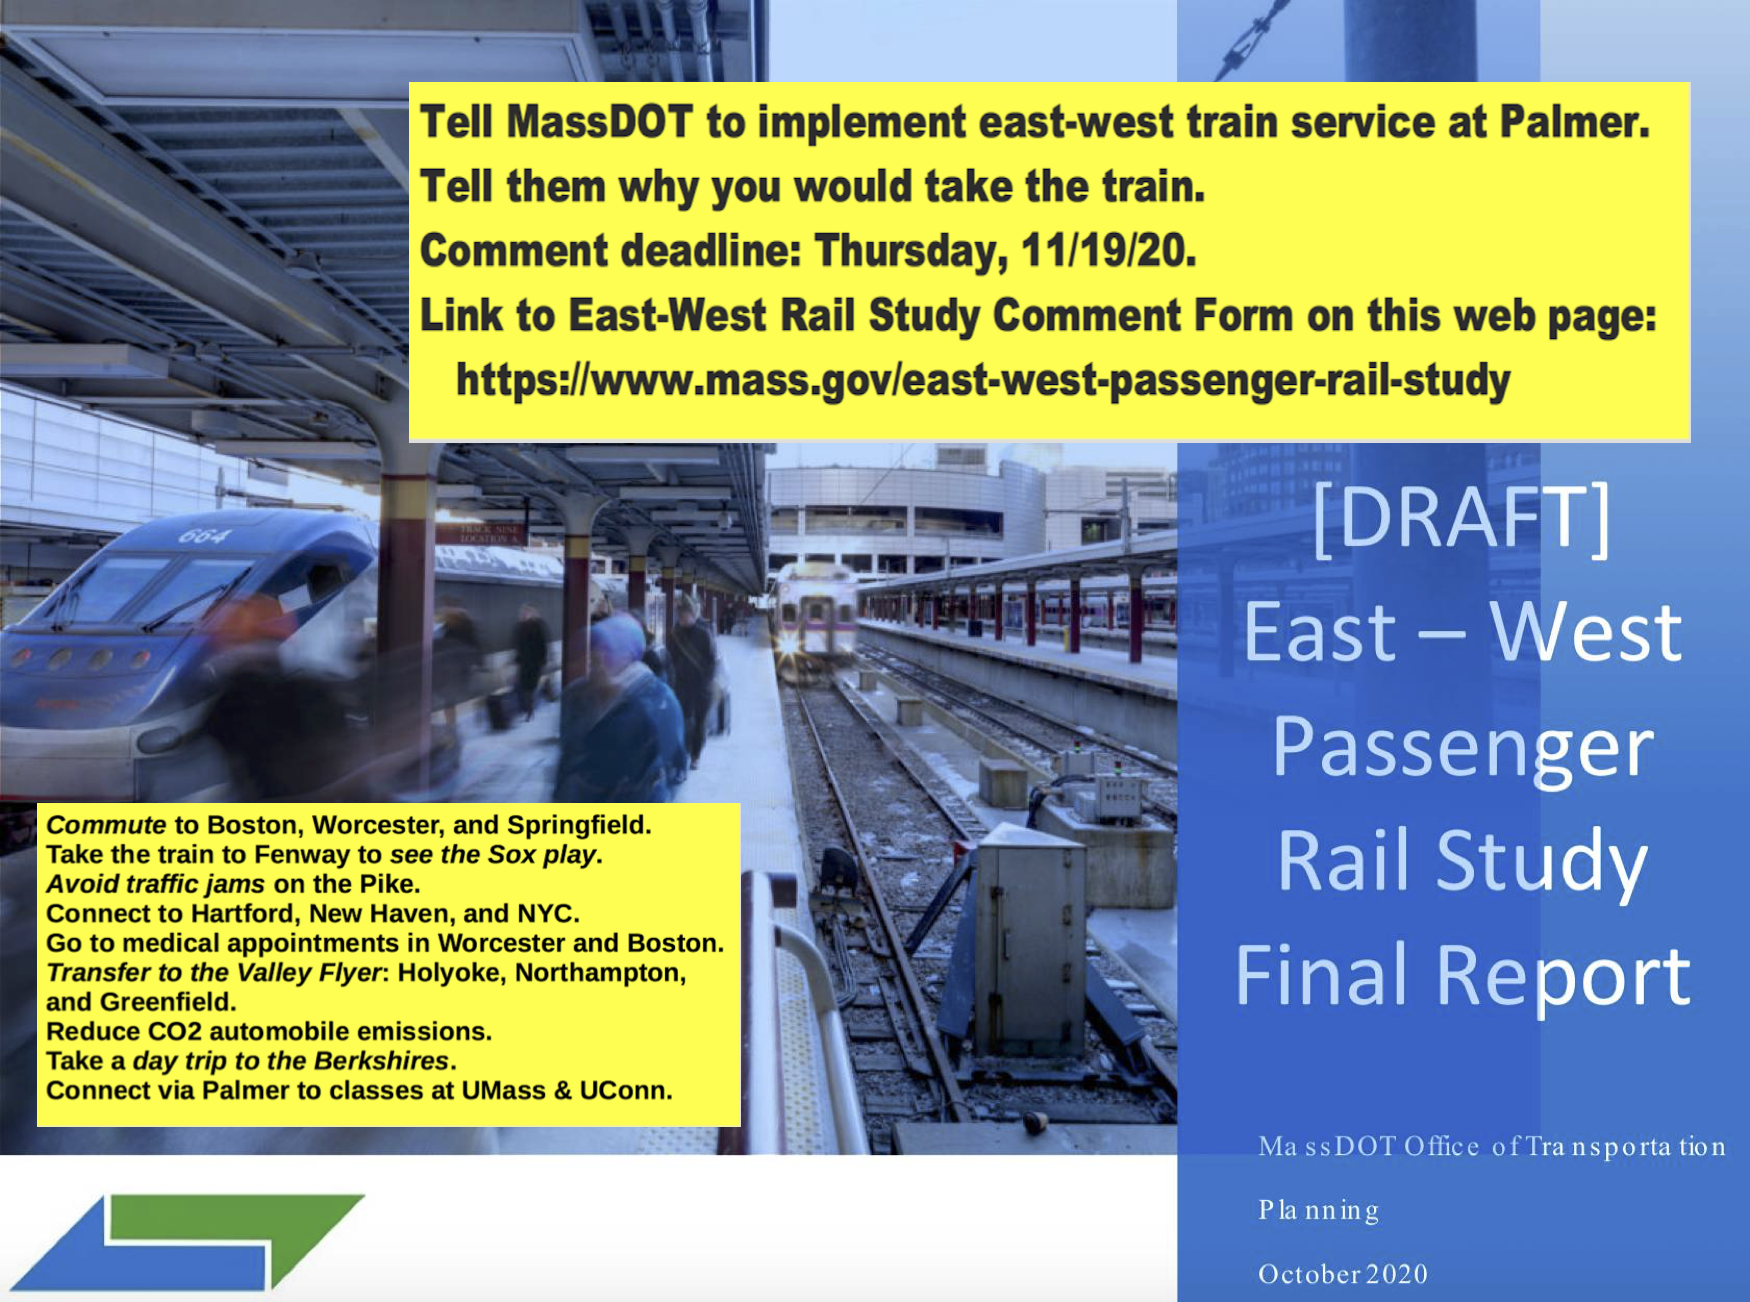 Cover page of DRAFT East-West Passenger Rail Study Final Report annotated with info about submitting public comments before the 11/19/20 deadline.